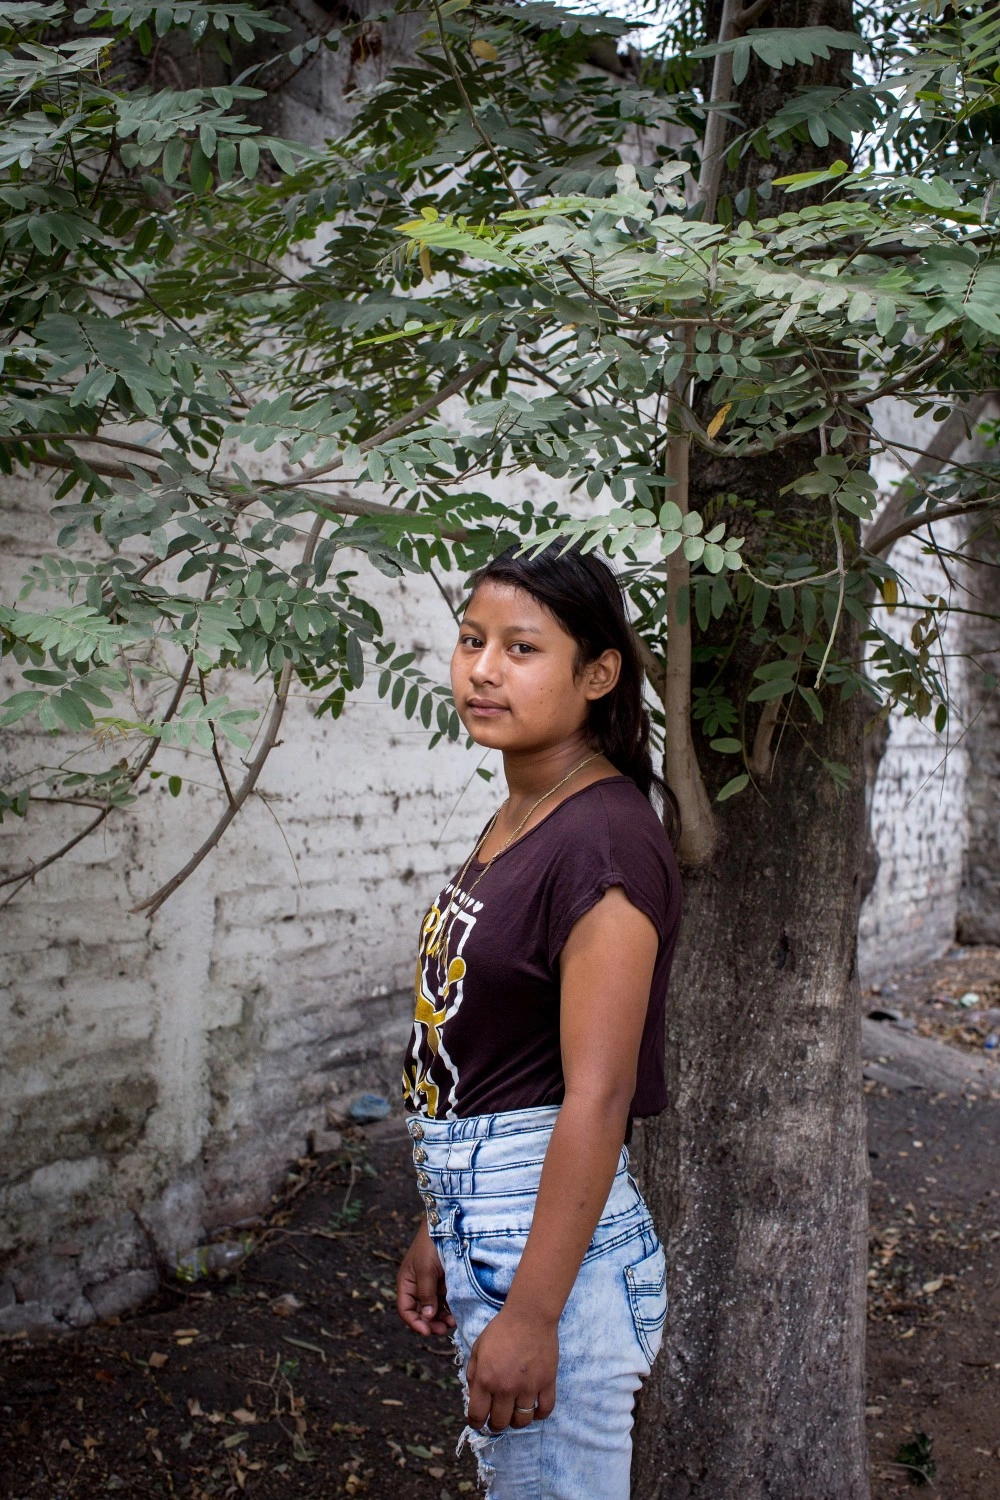 April 2017, El Salvador, San Salvador. Natalie Martinez, 15, poses for a portrait near the soccer field she used to play on in her neighborhood of San Salvador. She had to quit soccer because she works nights and weekends now whenever she's not in school at a local mechanic shop. Several of her brothers are gang members and she says they live in constant fear that the family will be attacked by police. She says she fears the police more than any other gang. "I had a friend who was really pretty once. Karin. She was 15. A gangster wanted her but she rejected him. He took her one day. After that they found her dead. "She says she is afraid to leave her home a lot of the time. (Natalie Keyssar)